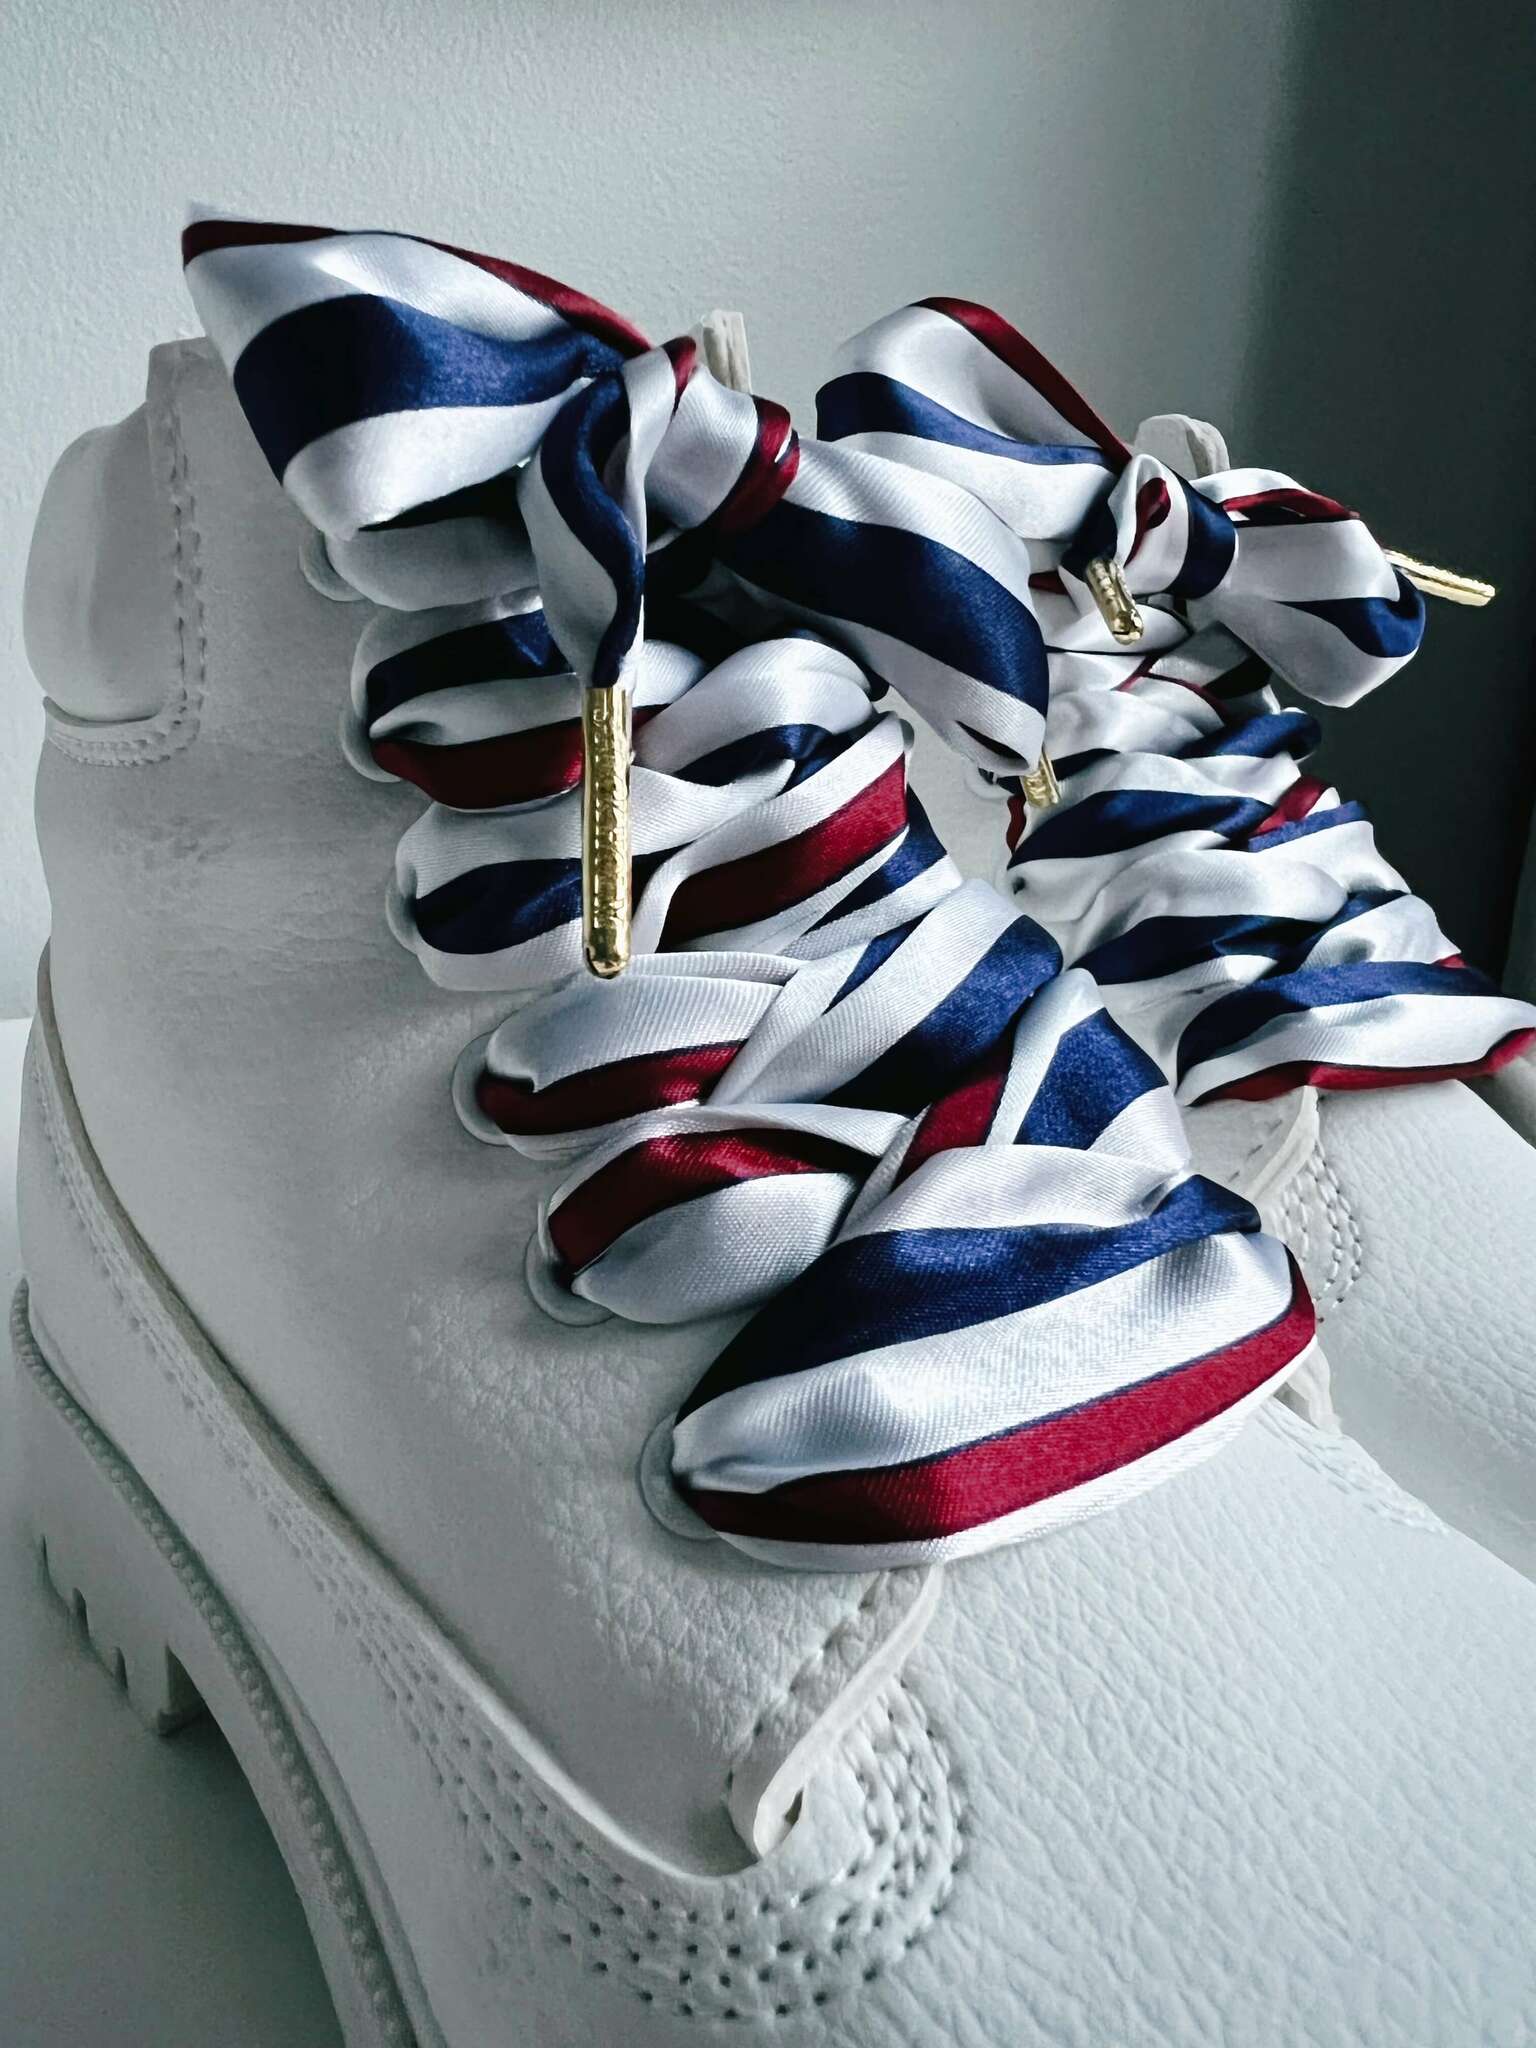 Scarf Shoelaces white, red, blue - The Shoelace Brand